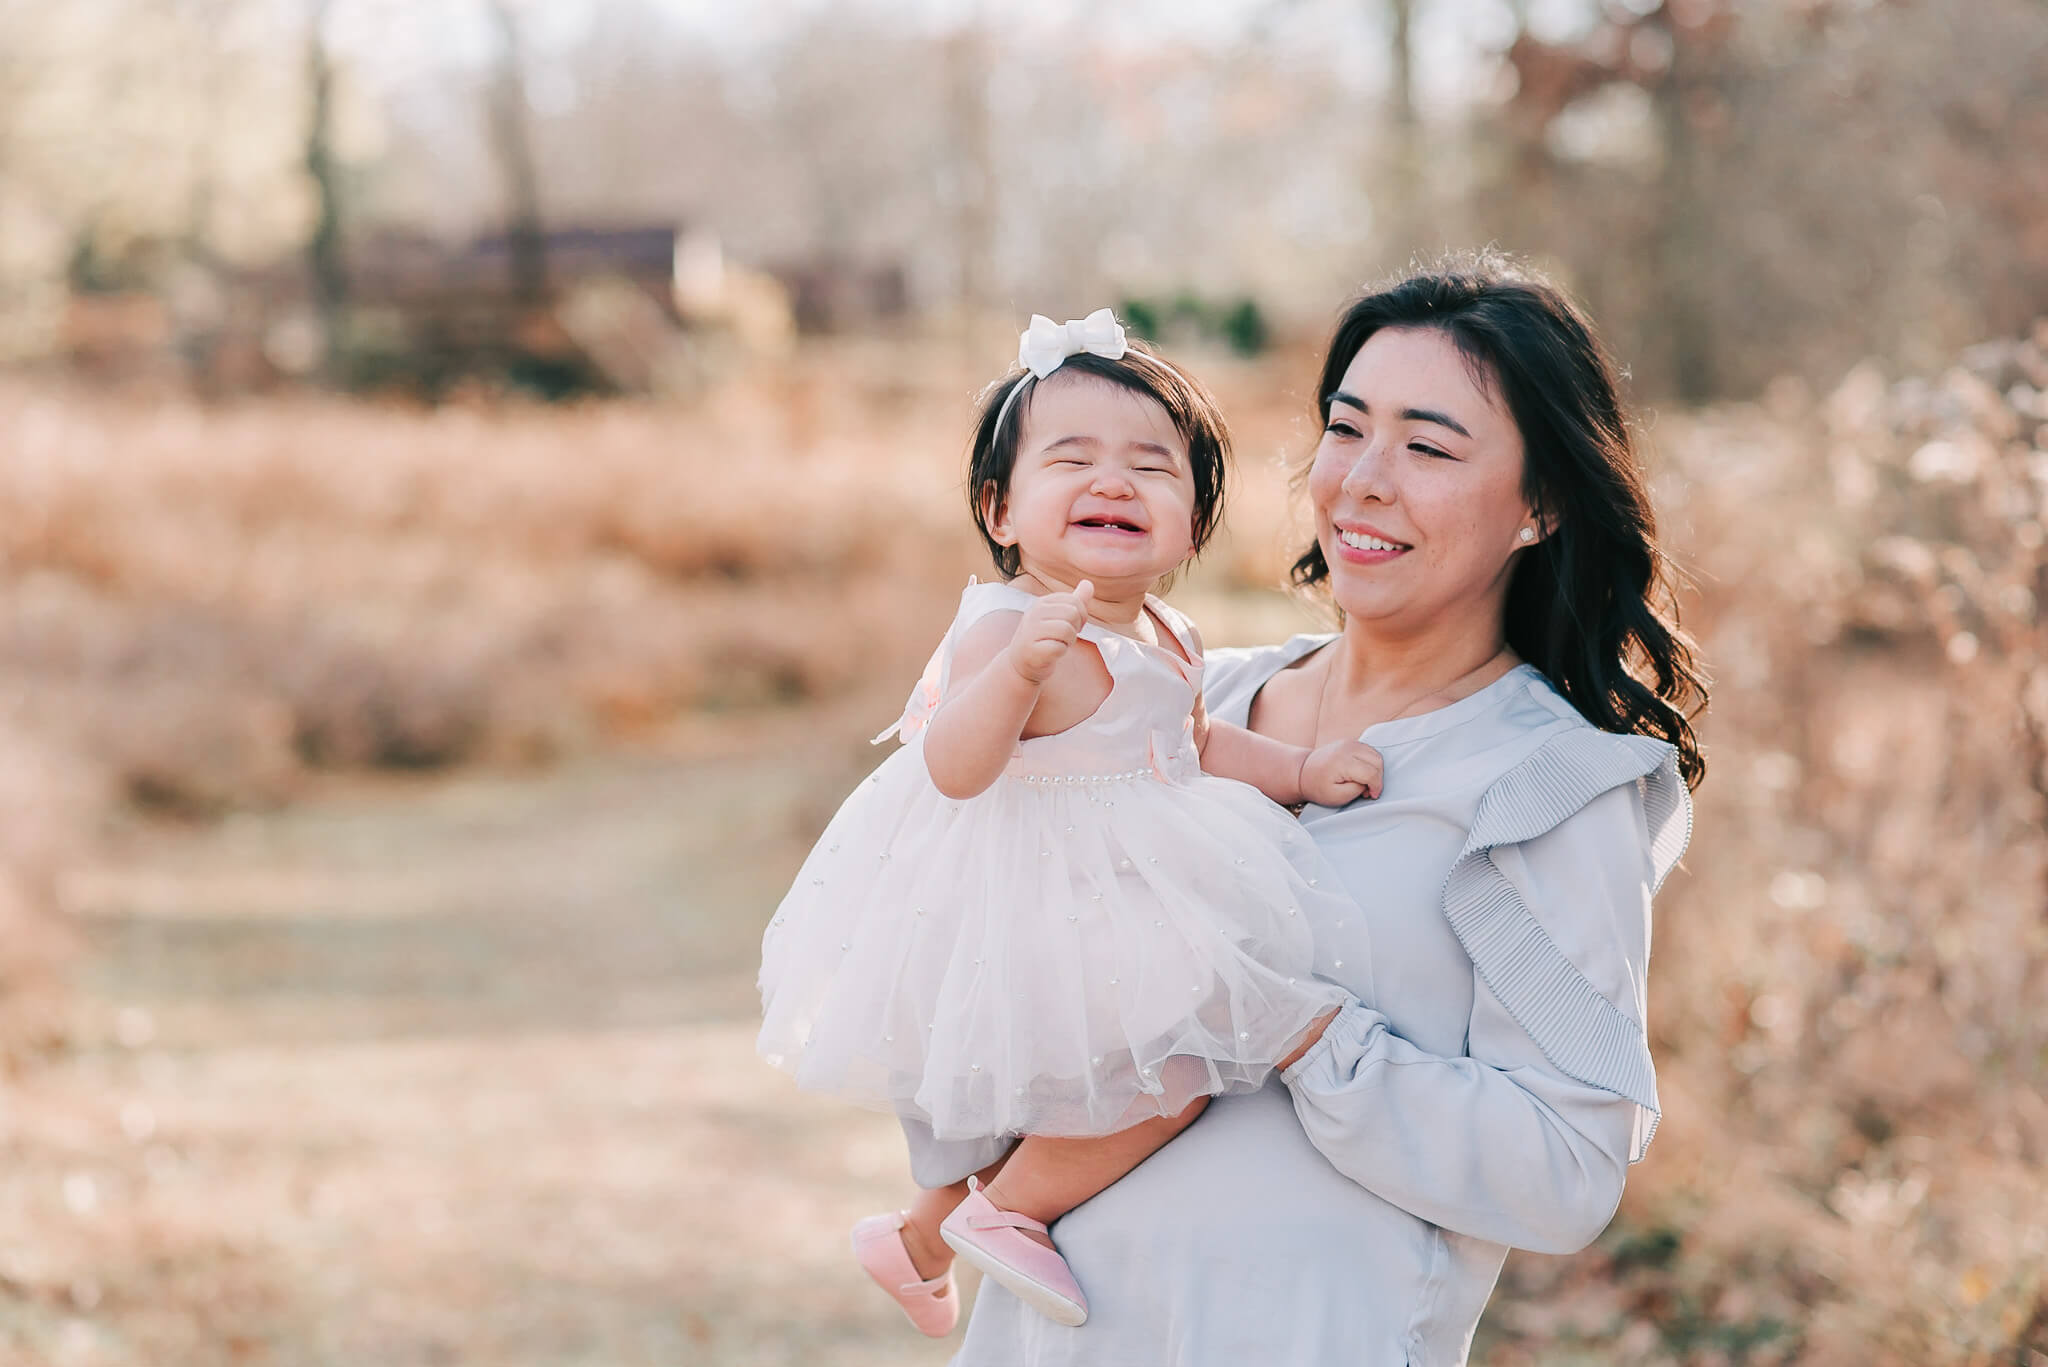 mom making her daughter laugh, things to do in loudoun county